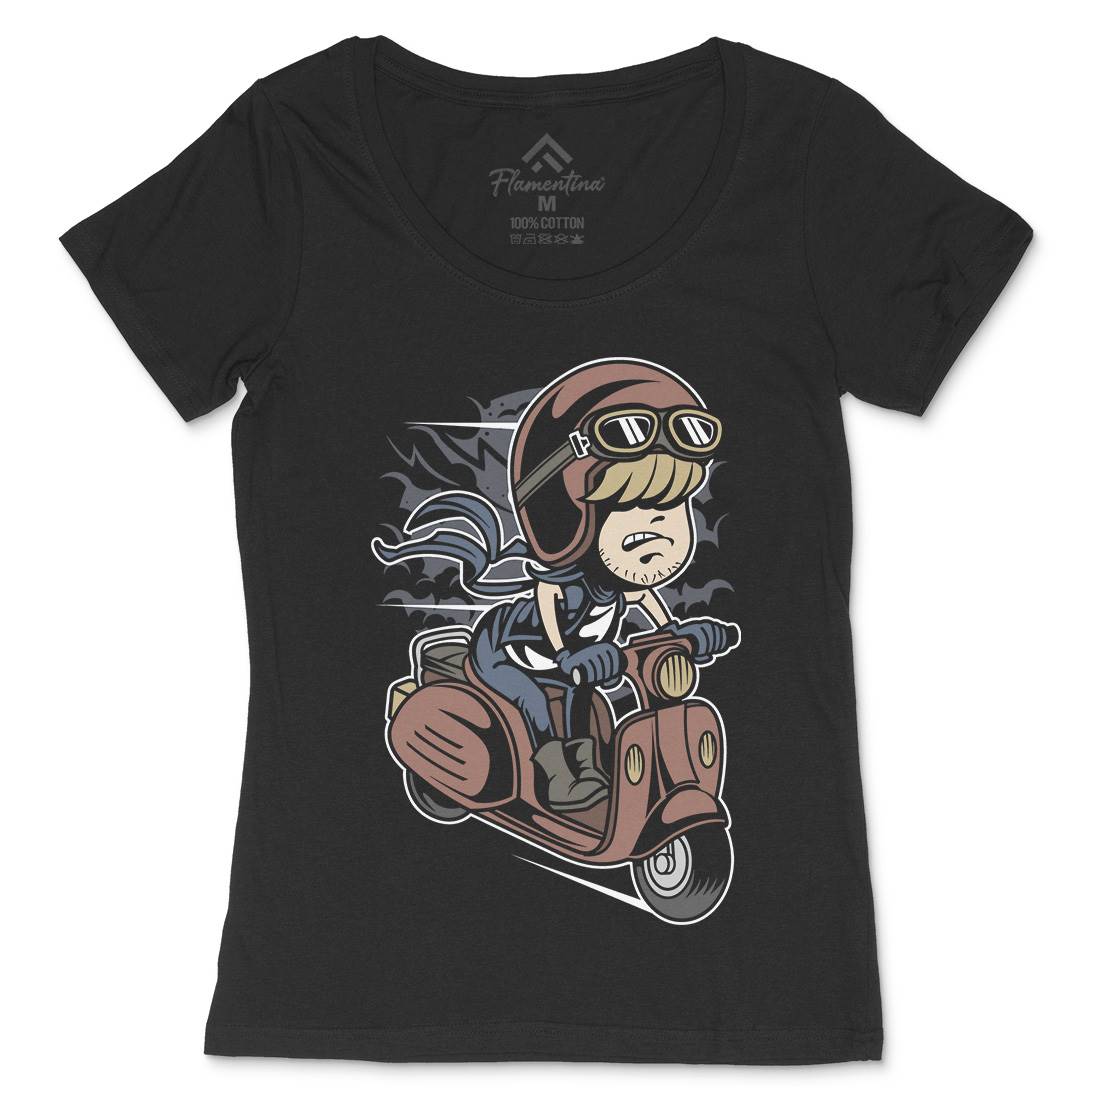 Scooter Rider Kid Womens Scoop Neck T-Shirt Motorcycles C436